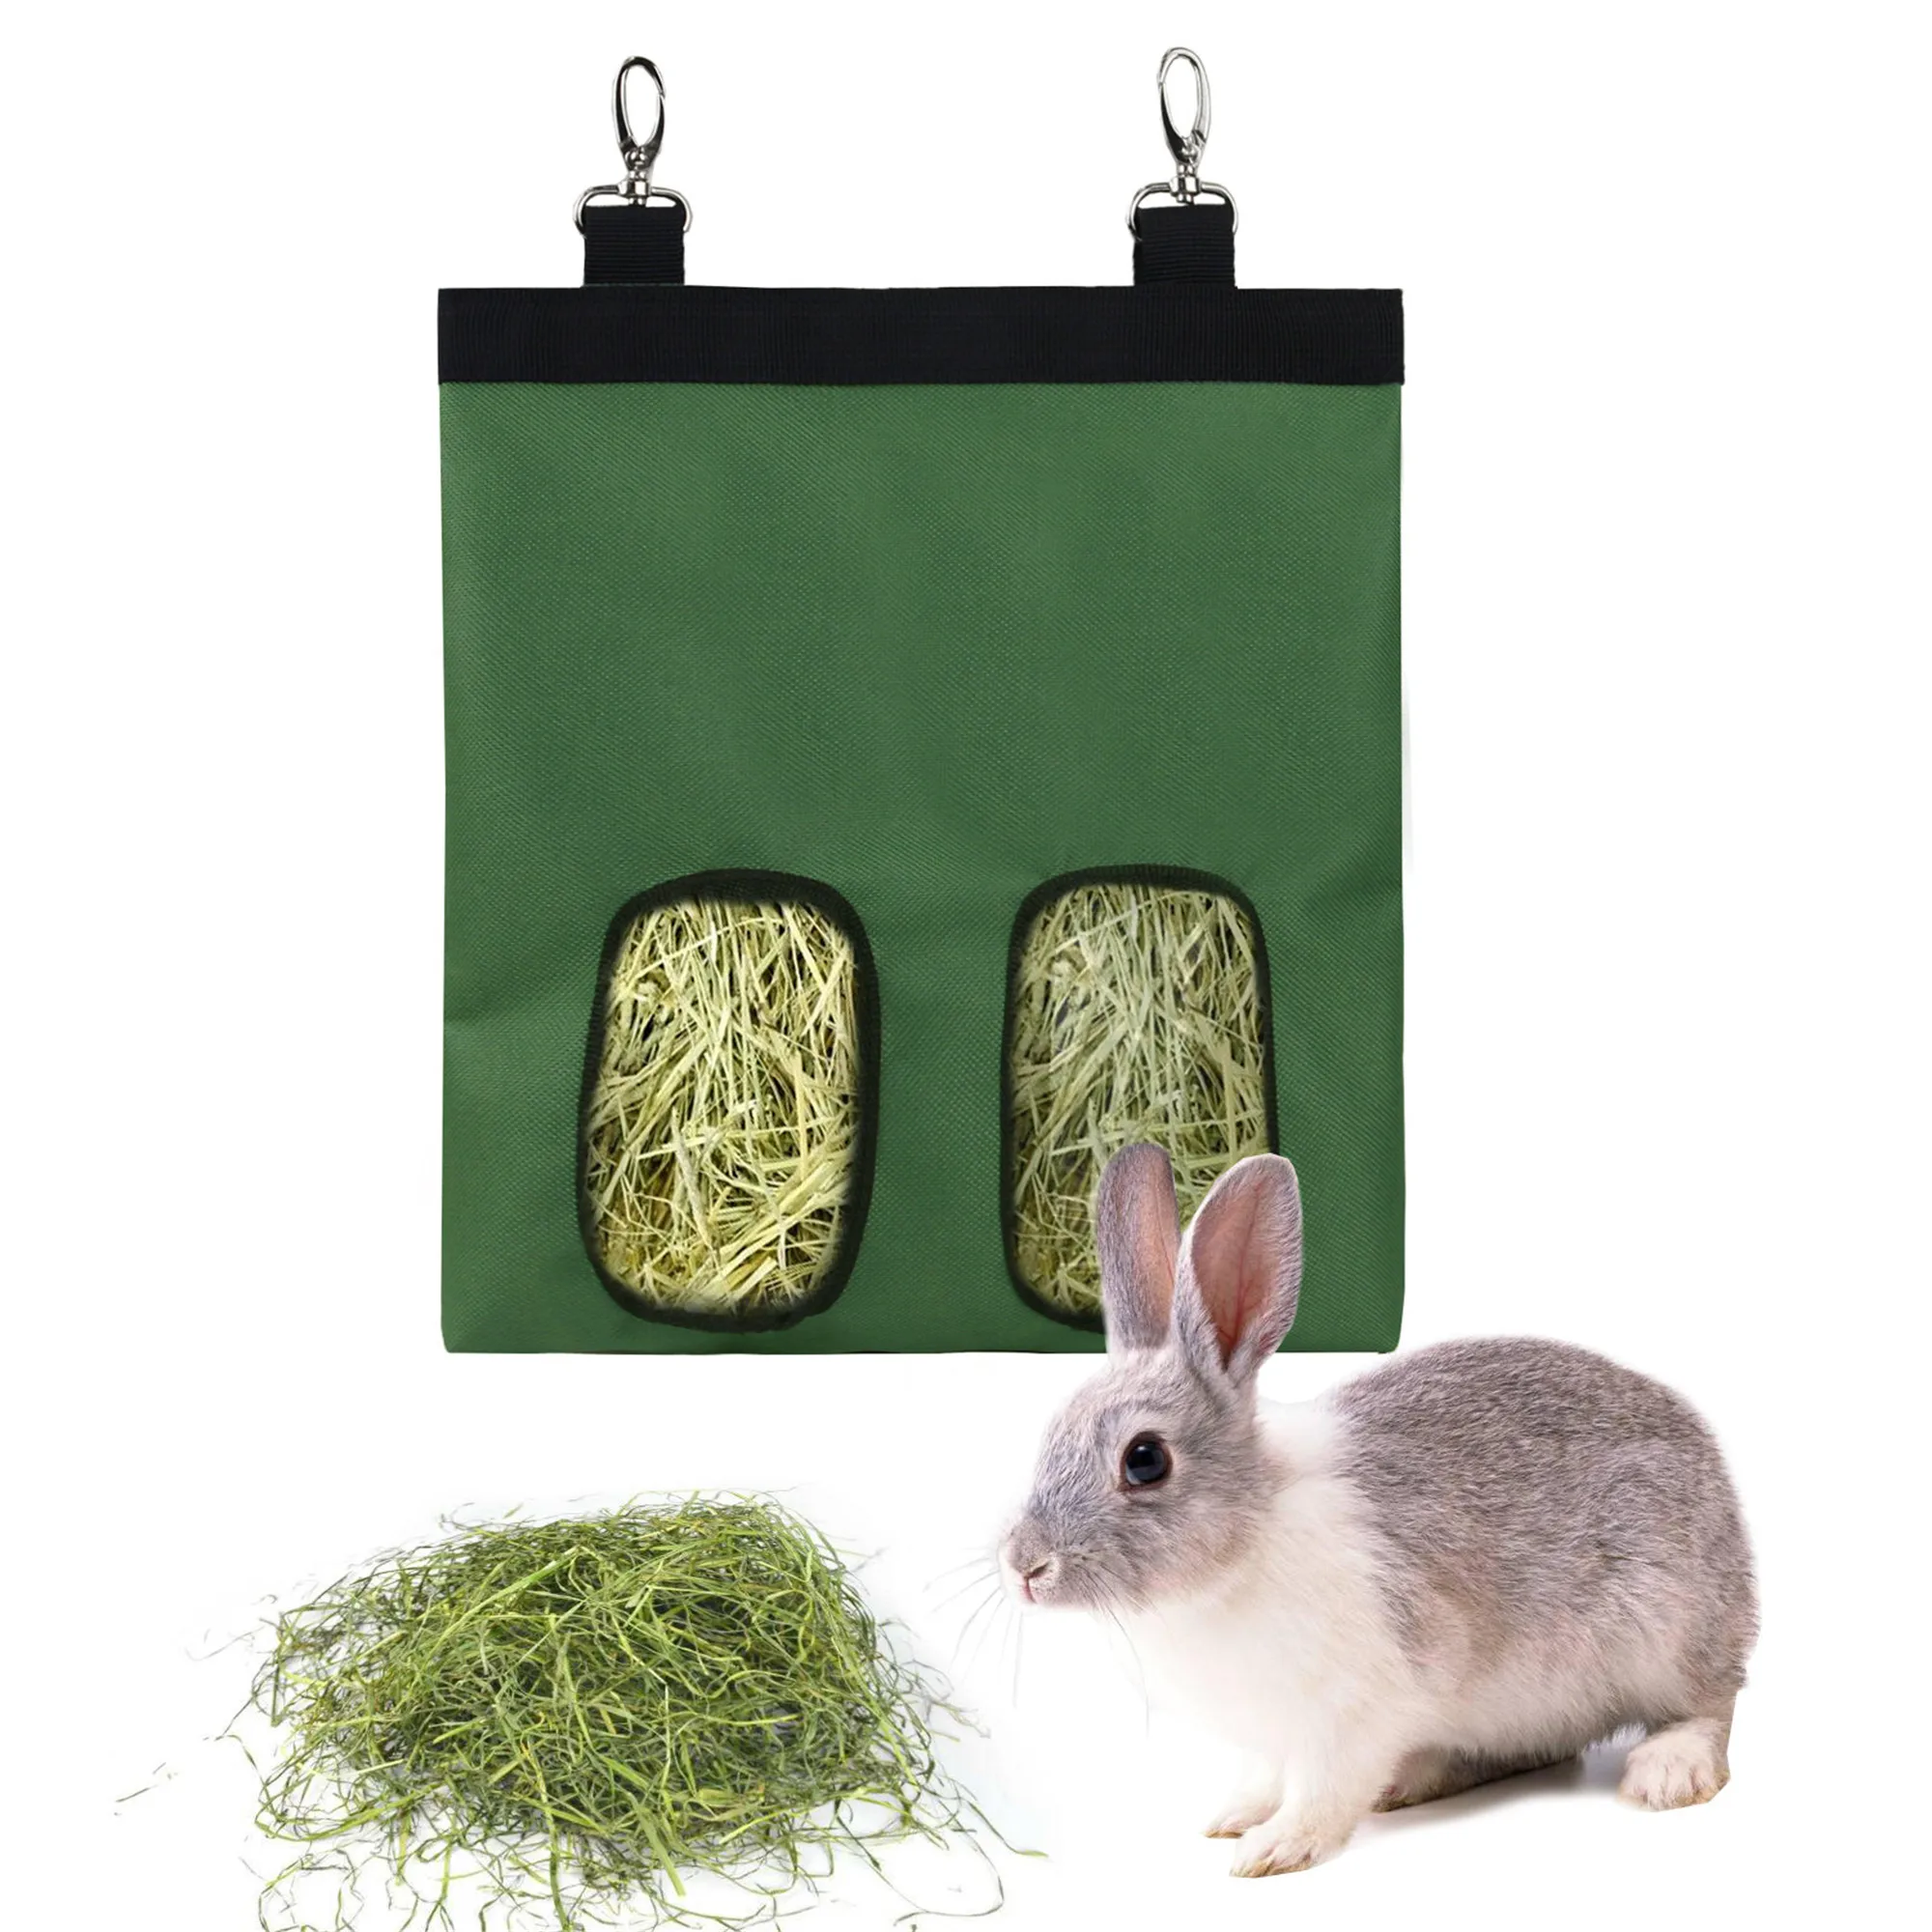 

Portable 2 holes 600D Oxford Small Animals Hanging Hay Feeder Bag for Rabbit Guinea Pig Chinchilla Hamsters